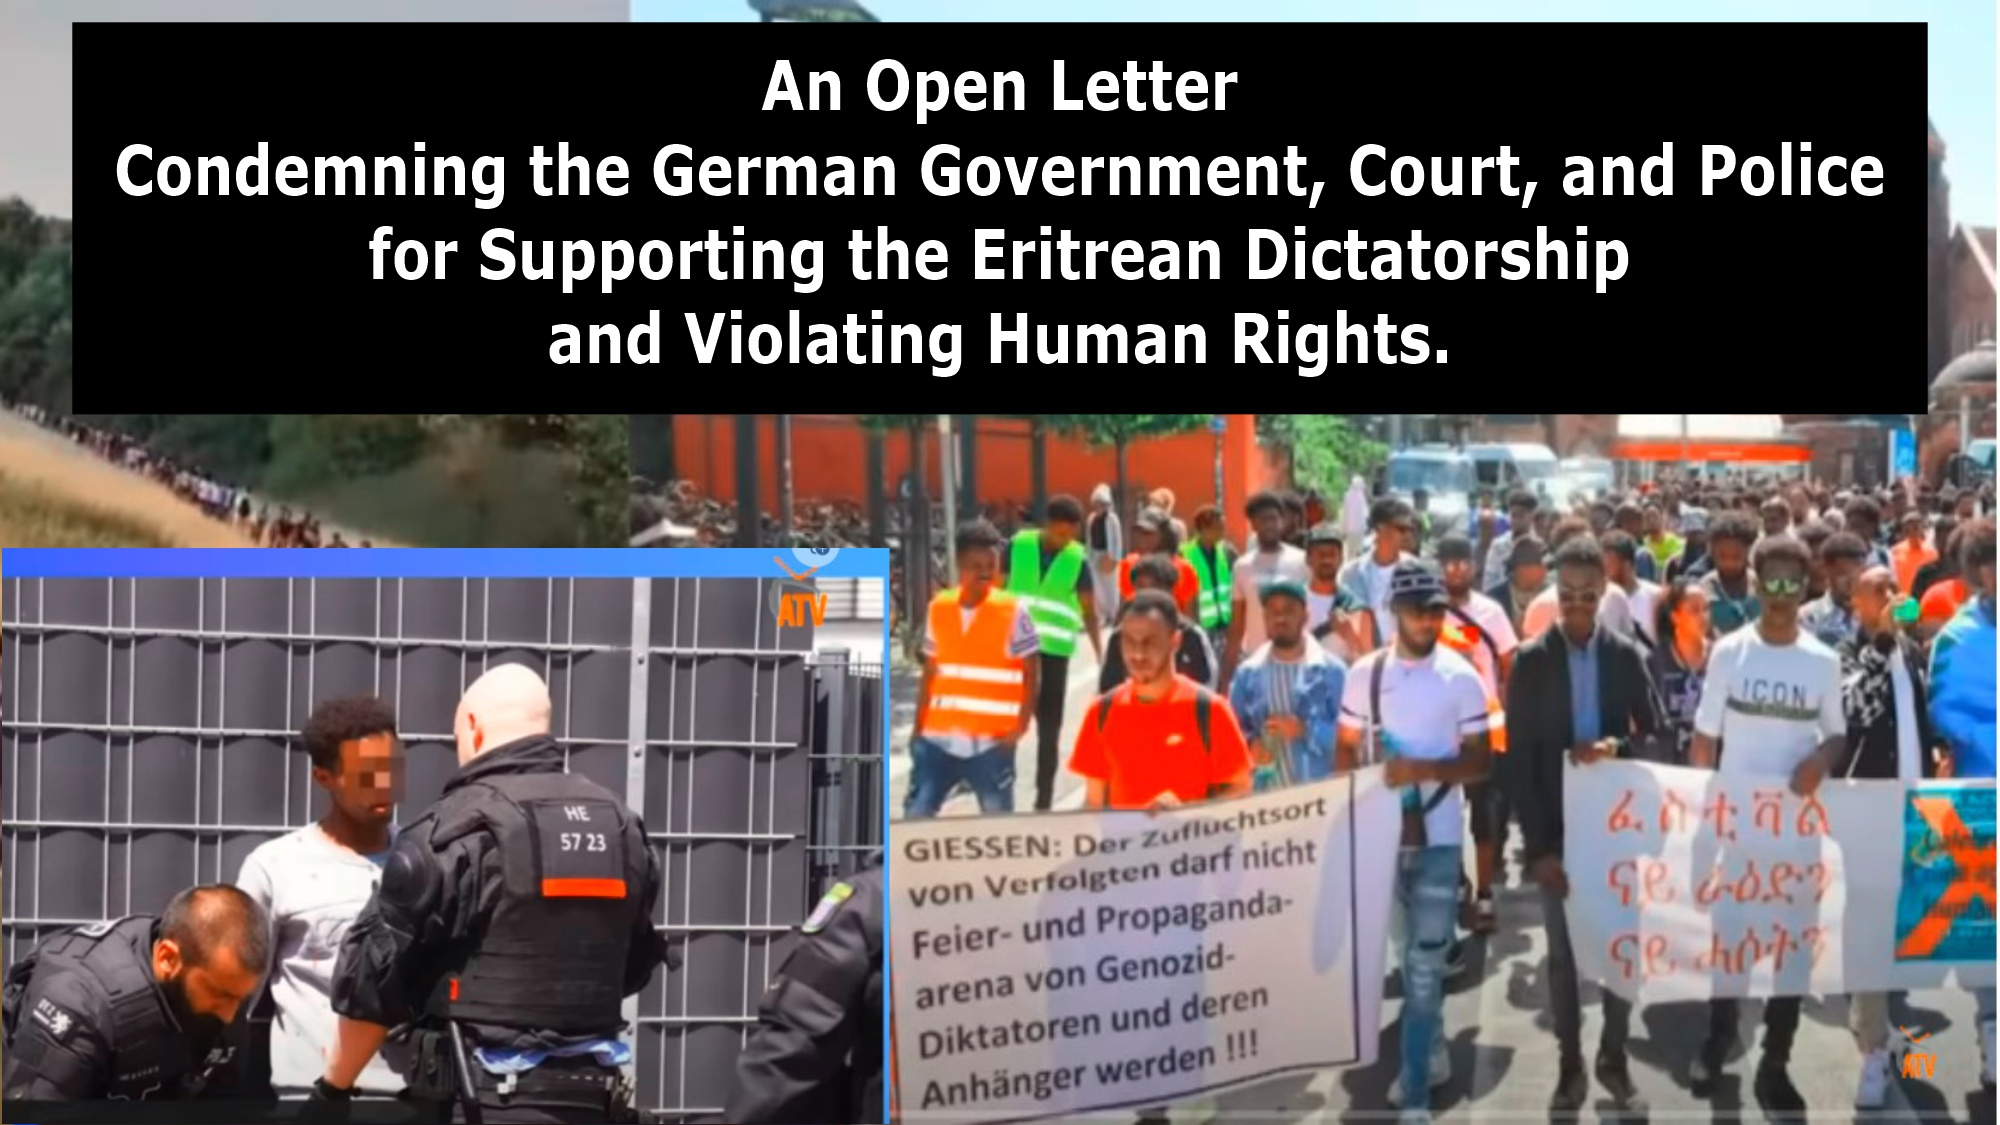 An Open Letter Condemning the German Government, Court, and Police for Supporting the Eritrean Dictatorship and Violating Human Rights.